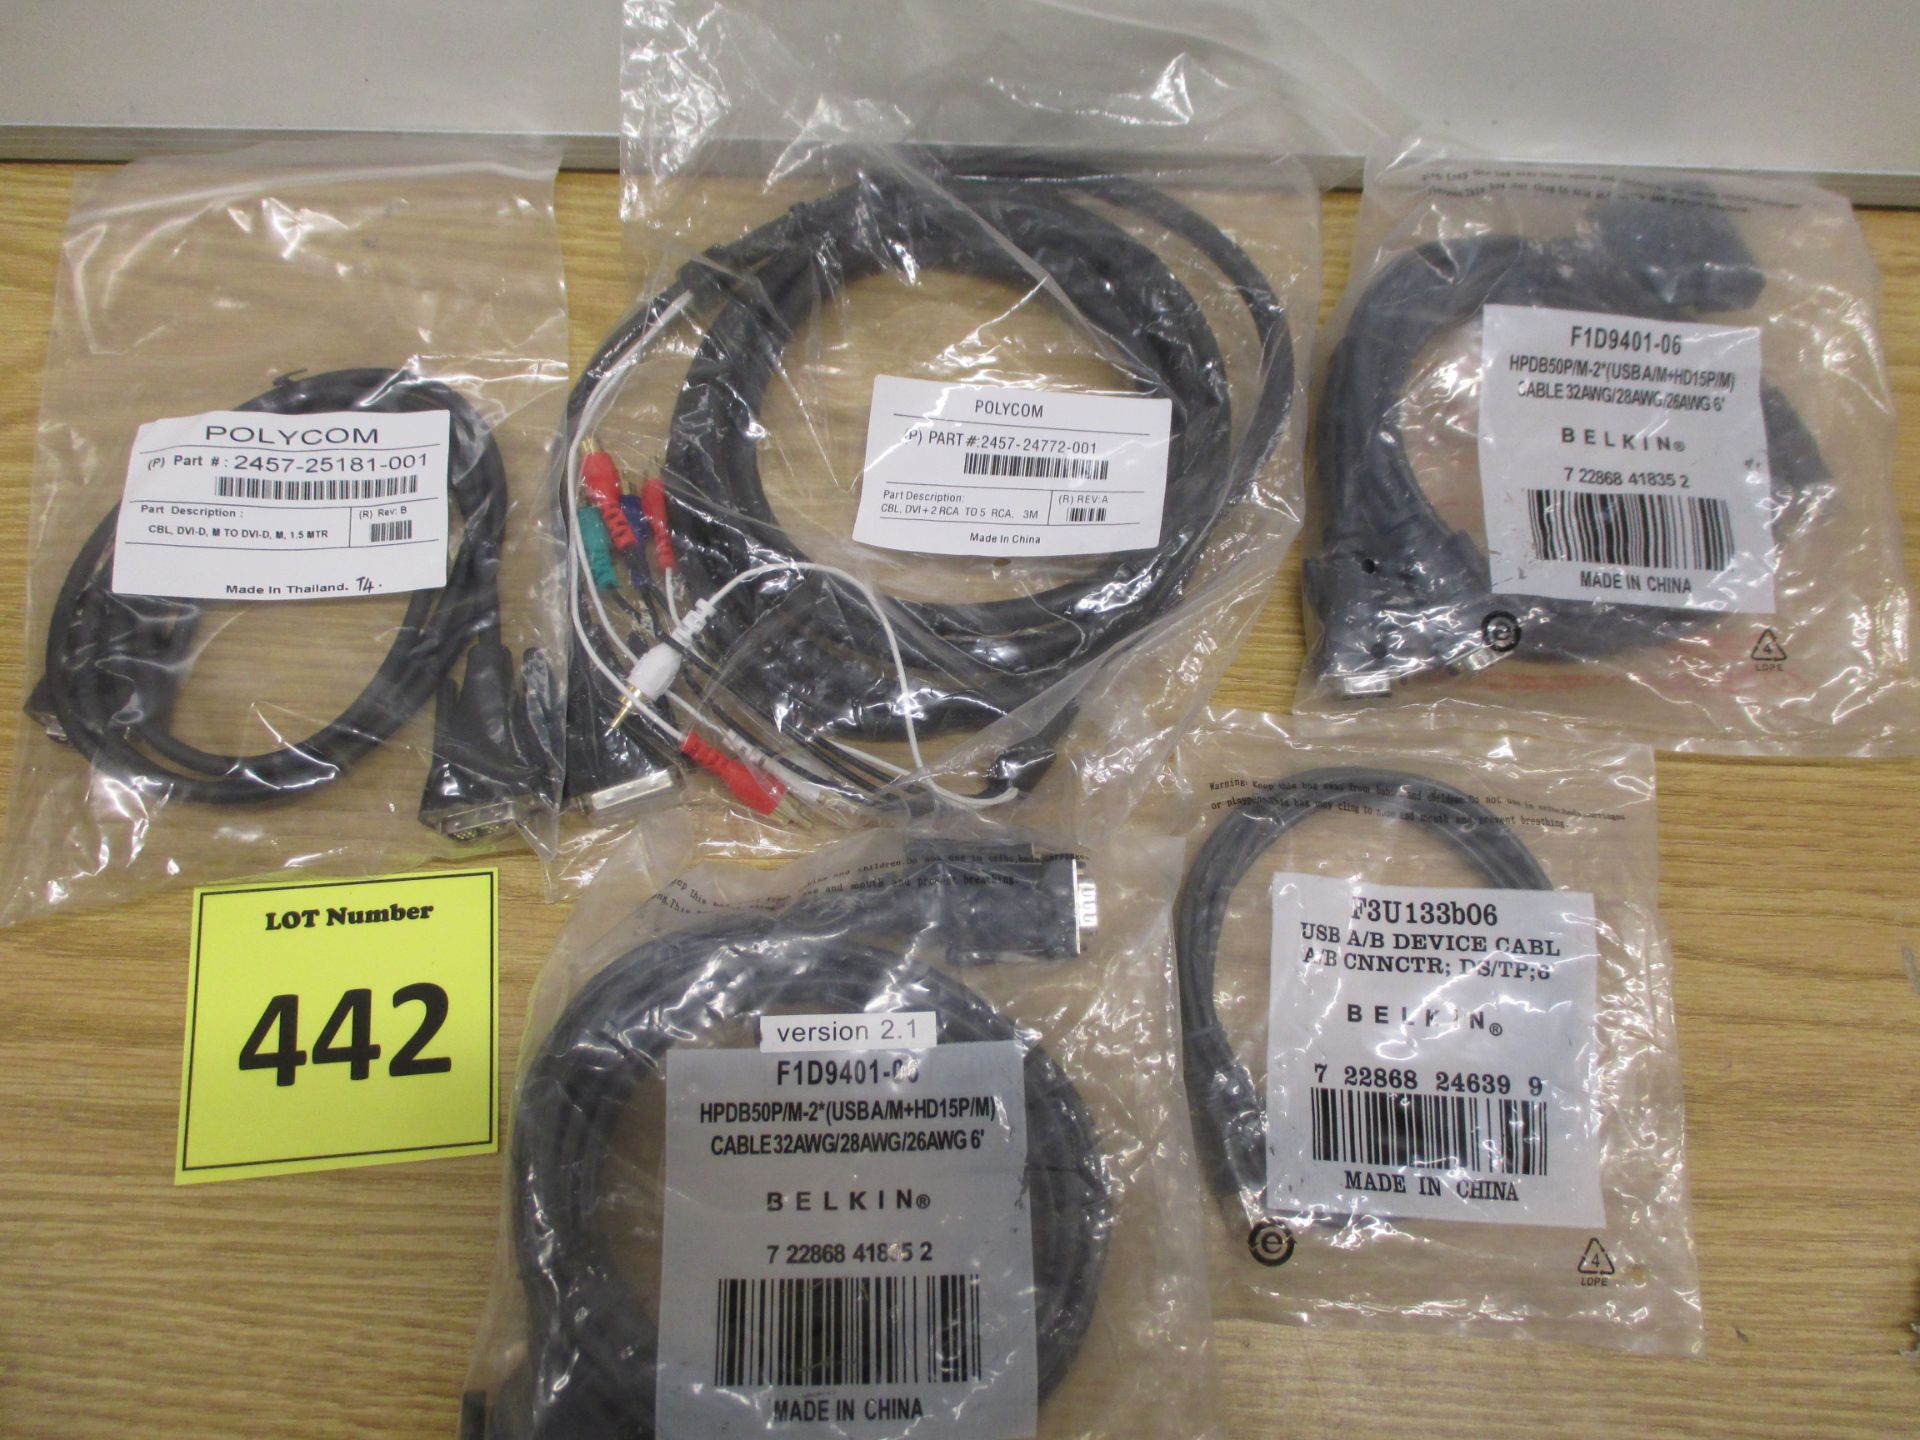 2 X NEW POLYCOM CABLES AND 3 X NEW BELKIN CABLES